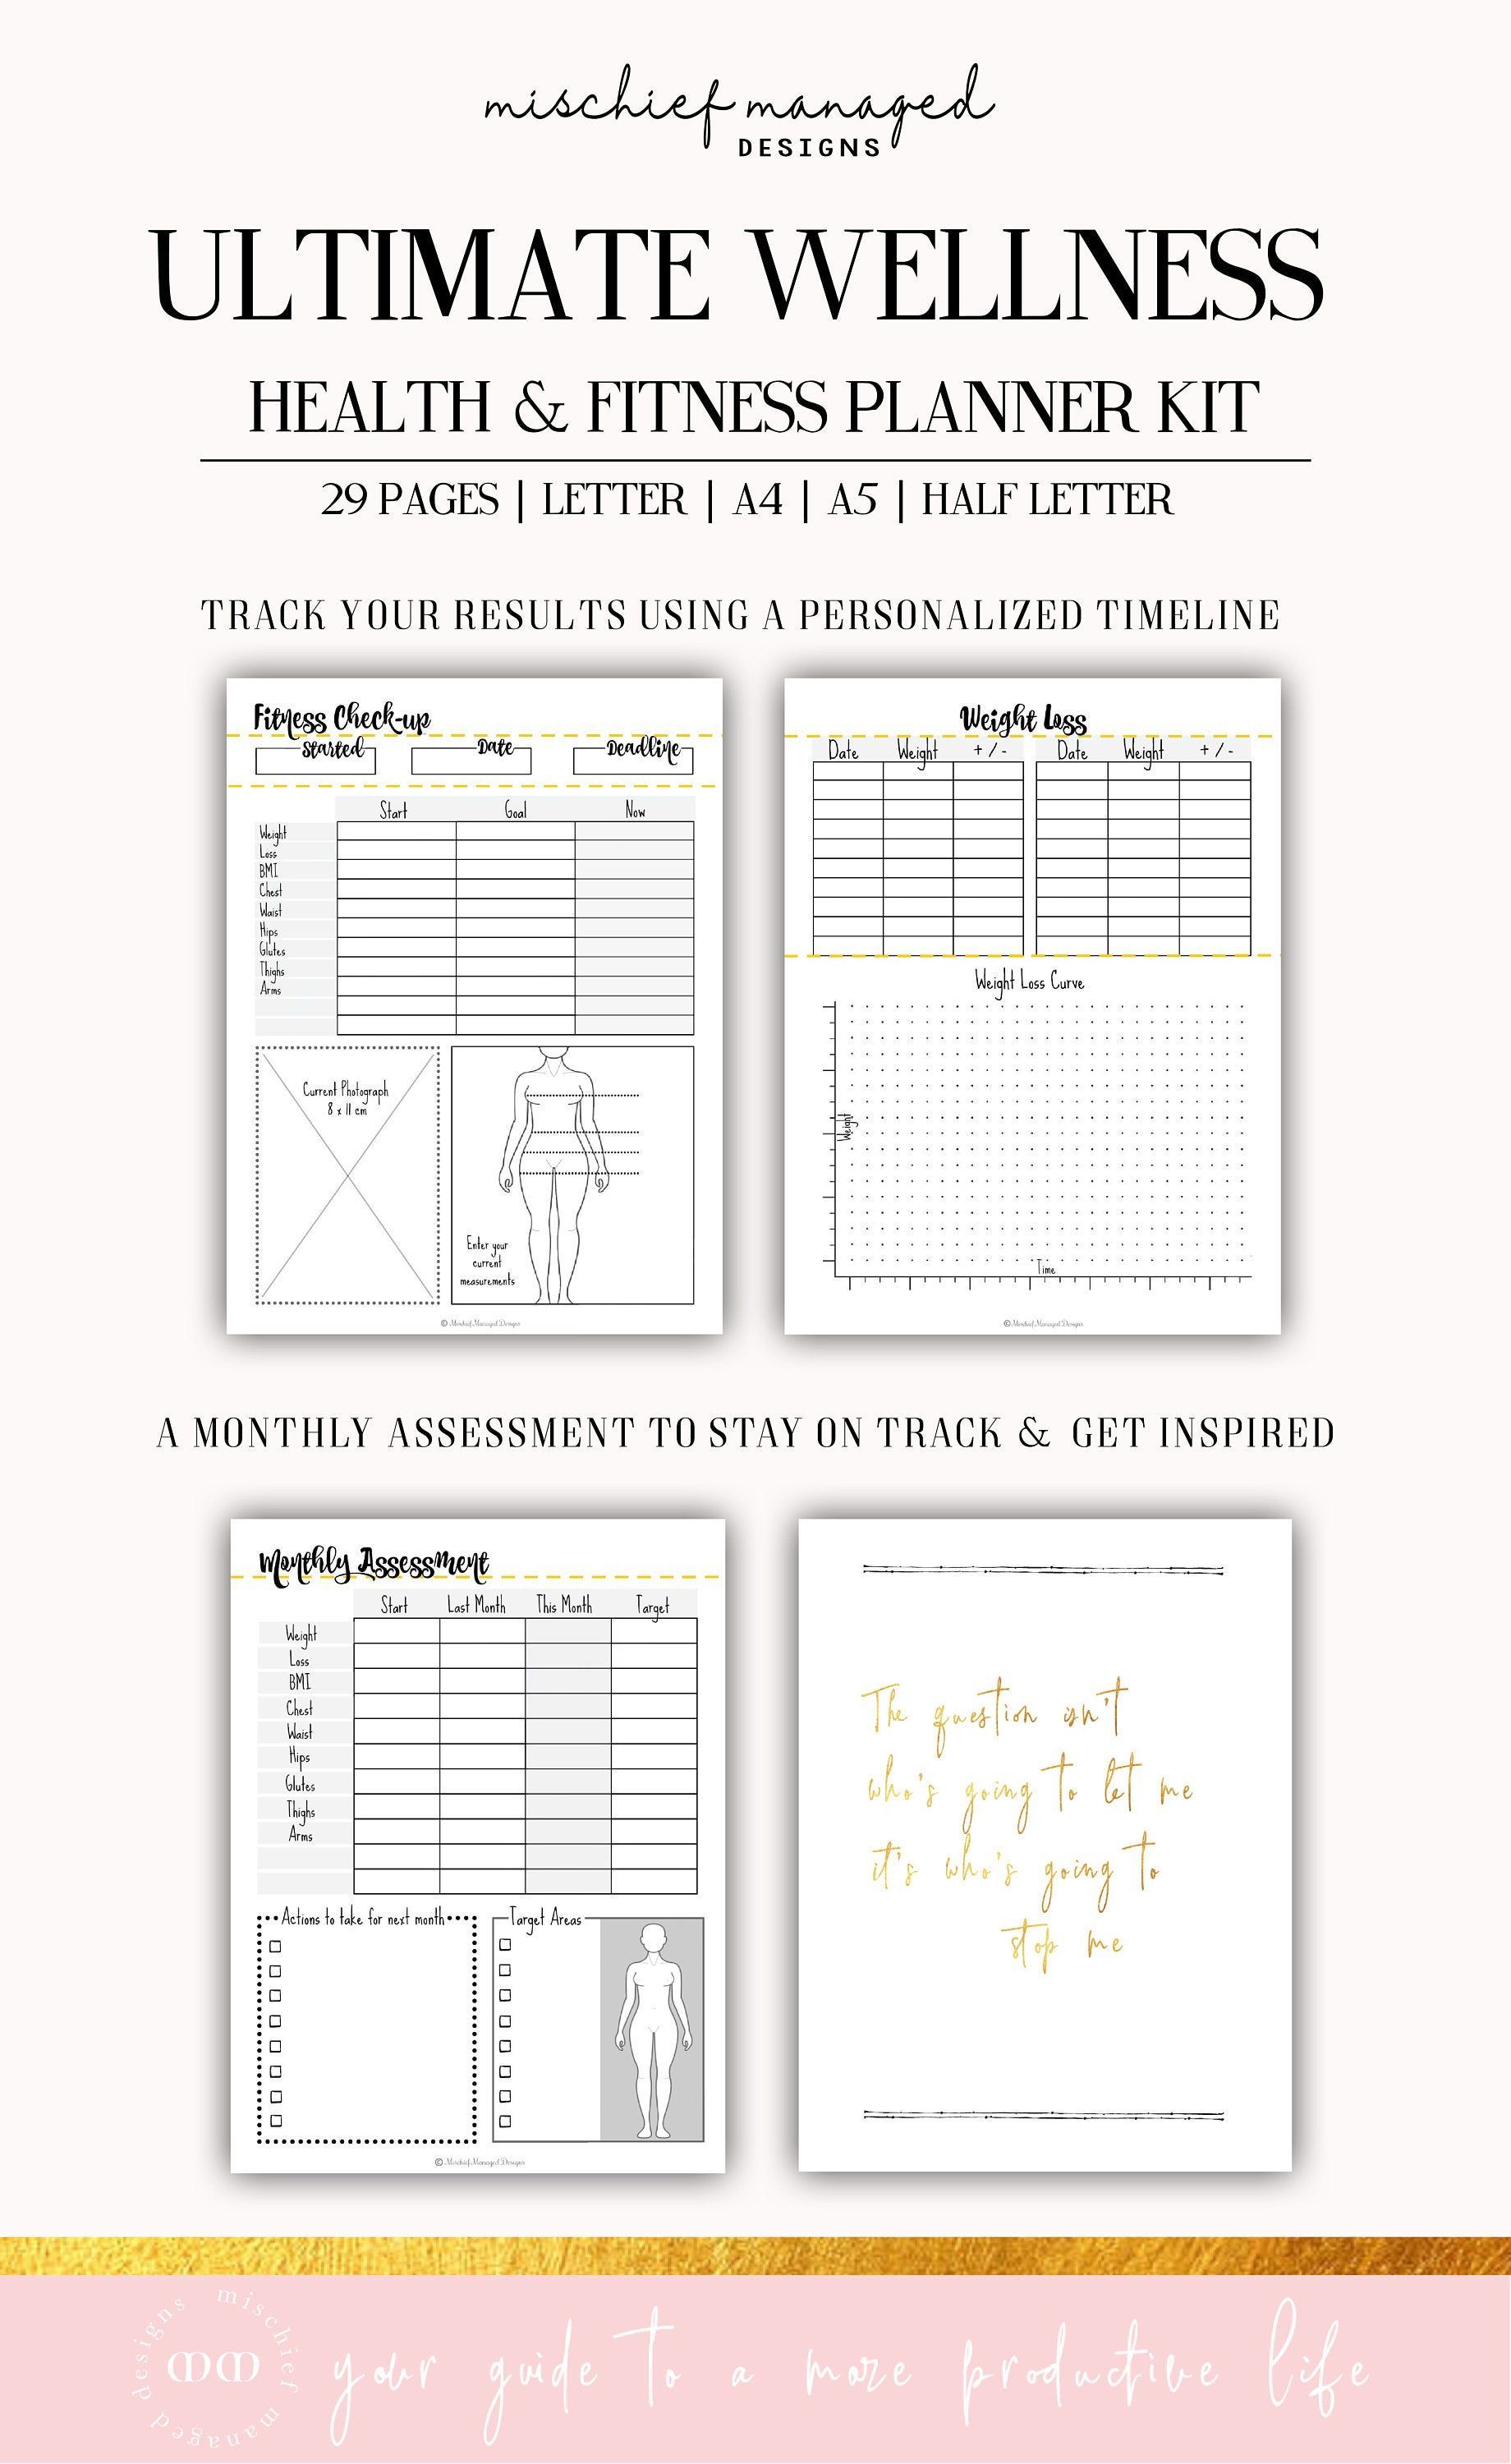 Ultimate Health & Fitness Planner, Workout Tracker, Fitness Planner, Fitness Tracker, Weight Loss Planner, US Letter, A4, A5, Half Letter - Ultimate Health & Fitness Planner, Workout Tracker, Fitness Planner, Fitness Tracker, Weight Loss Planner, US Letter, A4, A5, Half Letter -   19 commit30 fitness Planner ideas